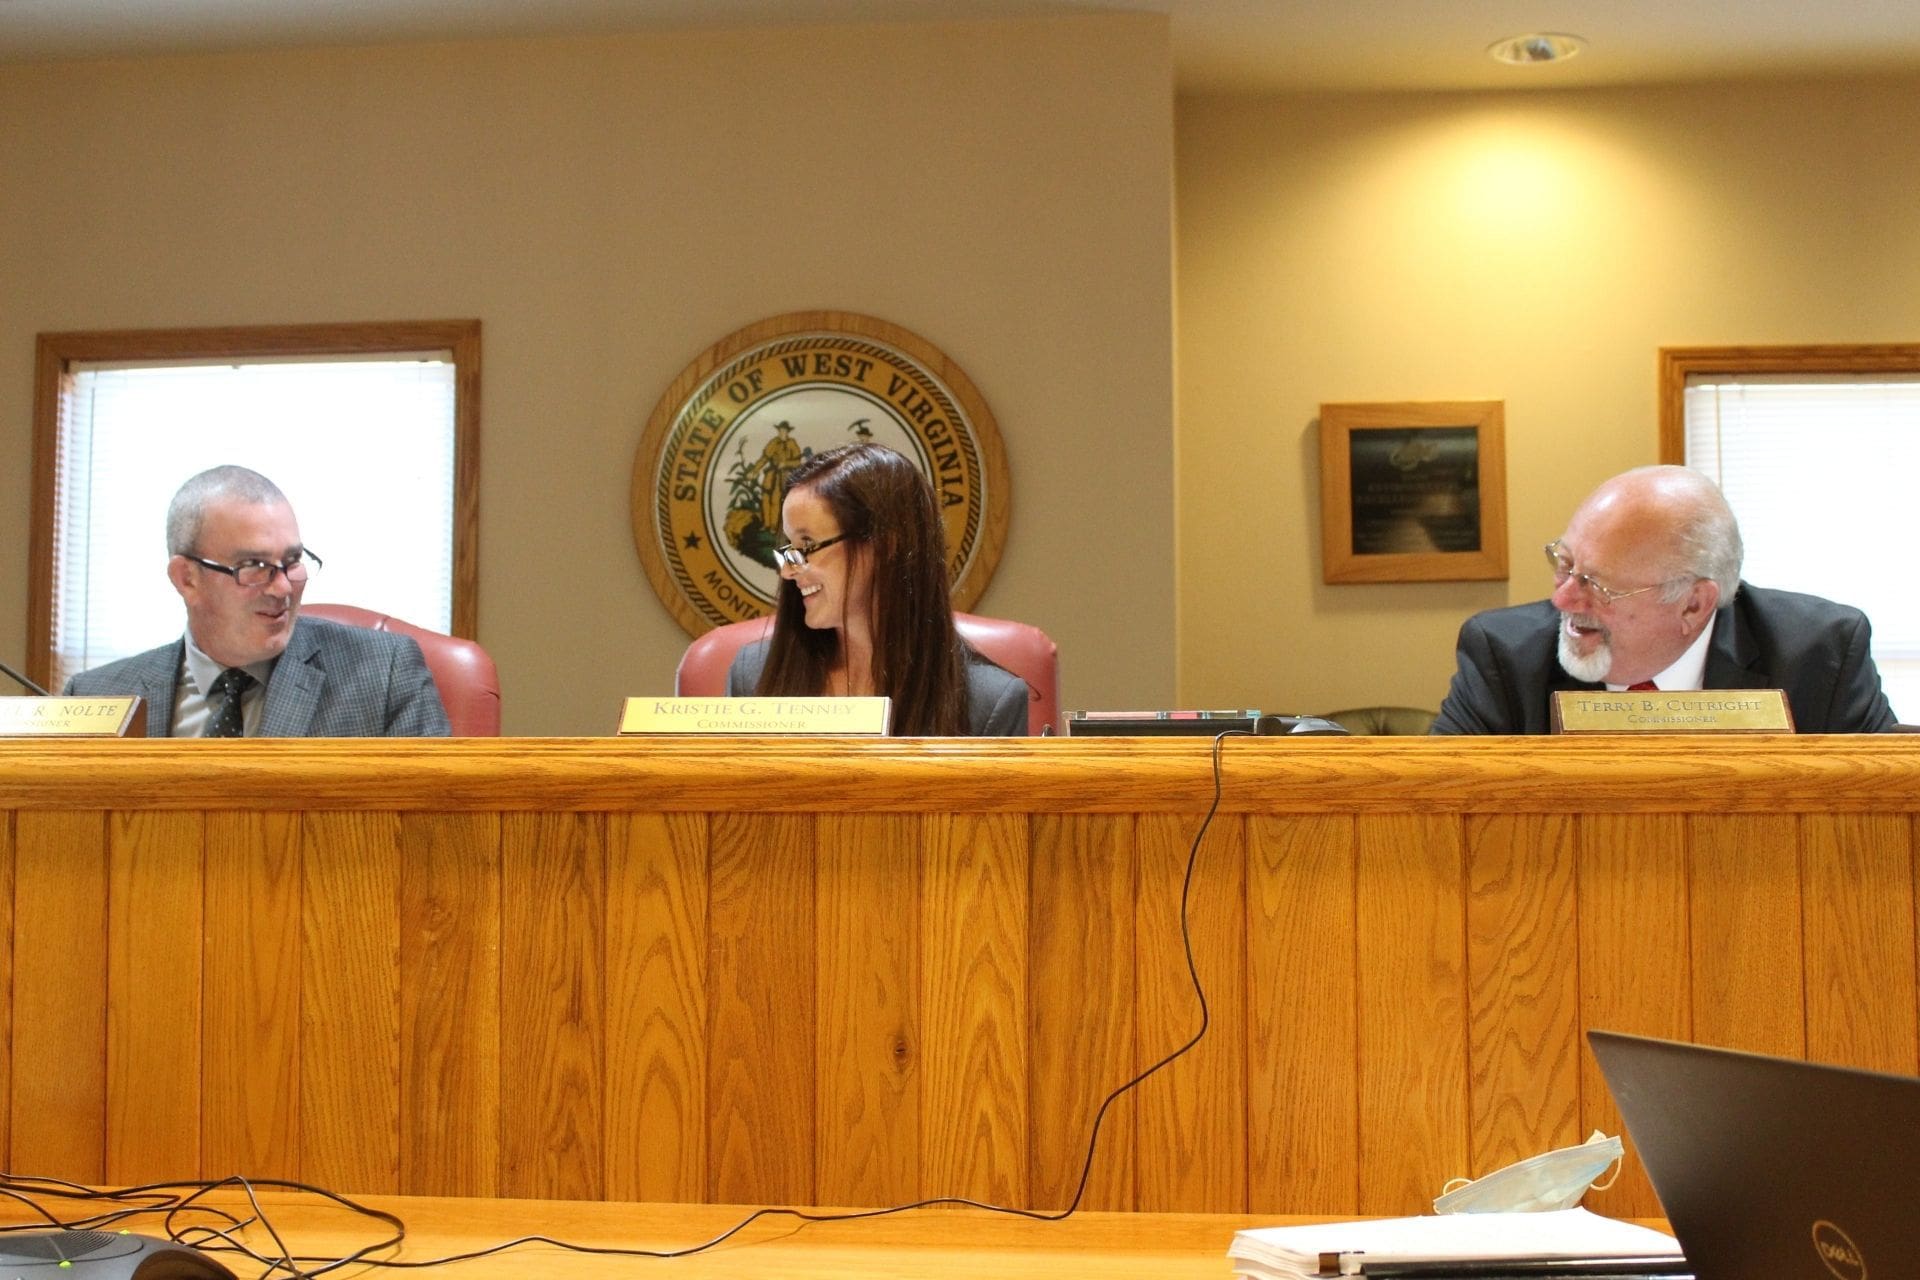 From left, commissioners Sam Nolte, Kristie Tenney and Terry Cutright.